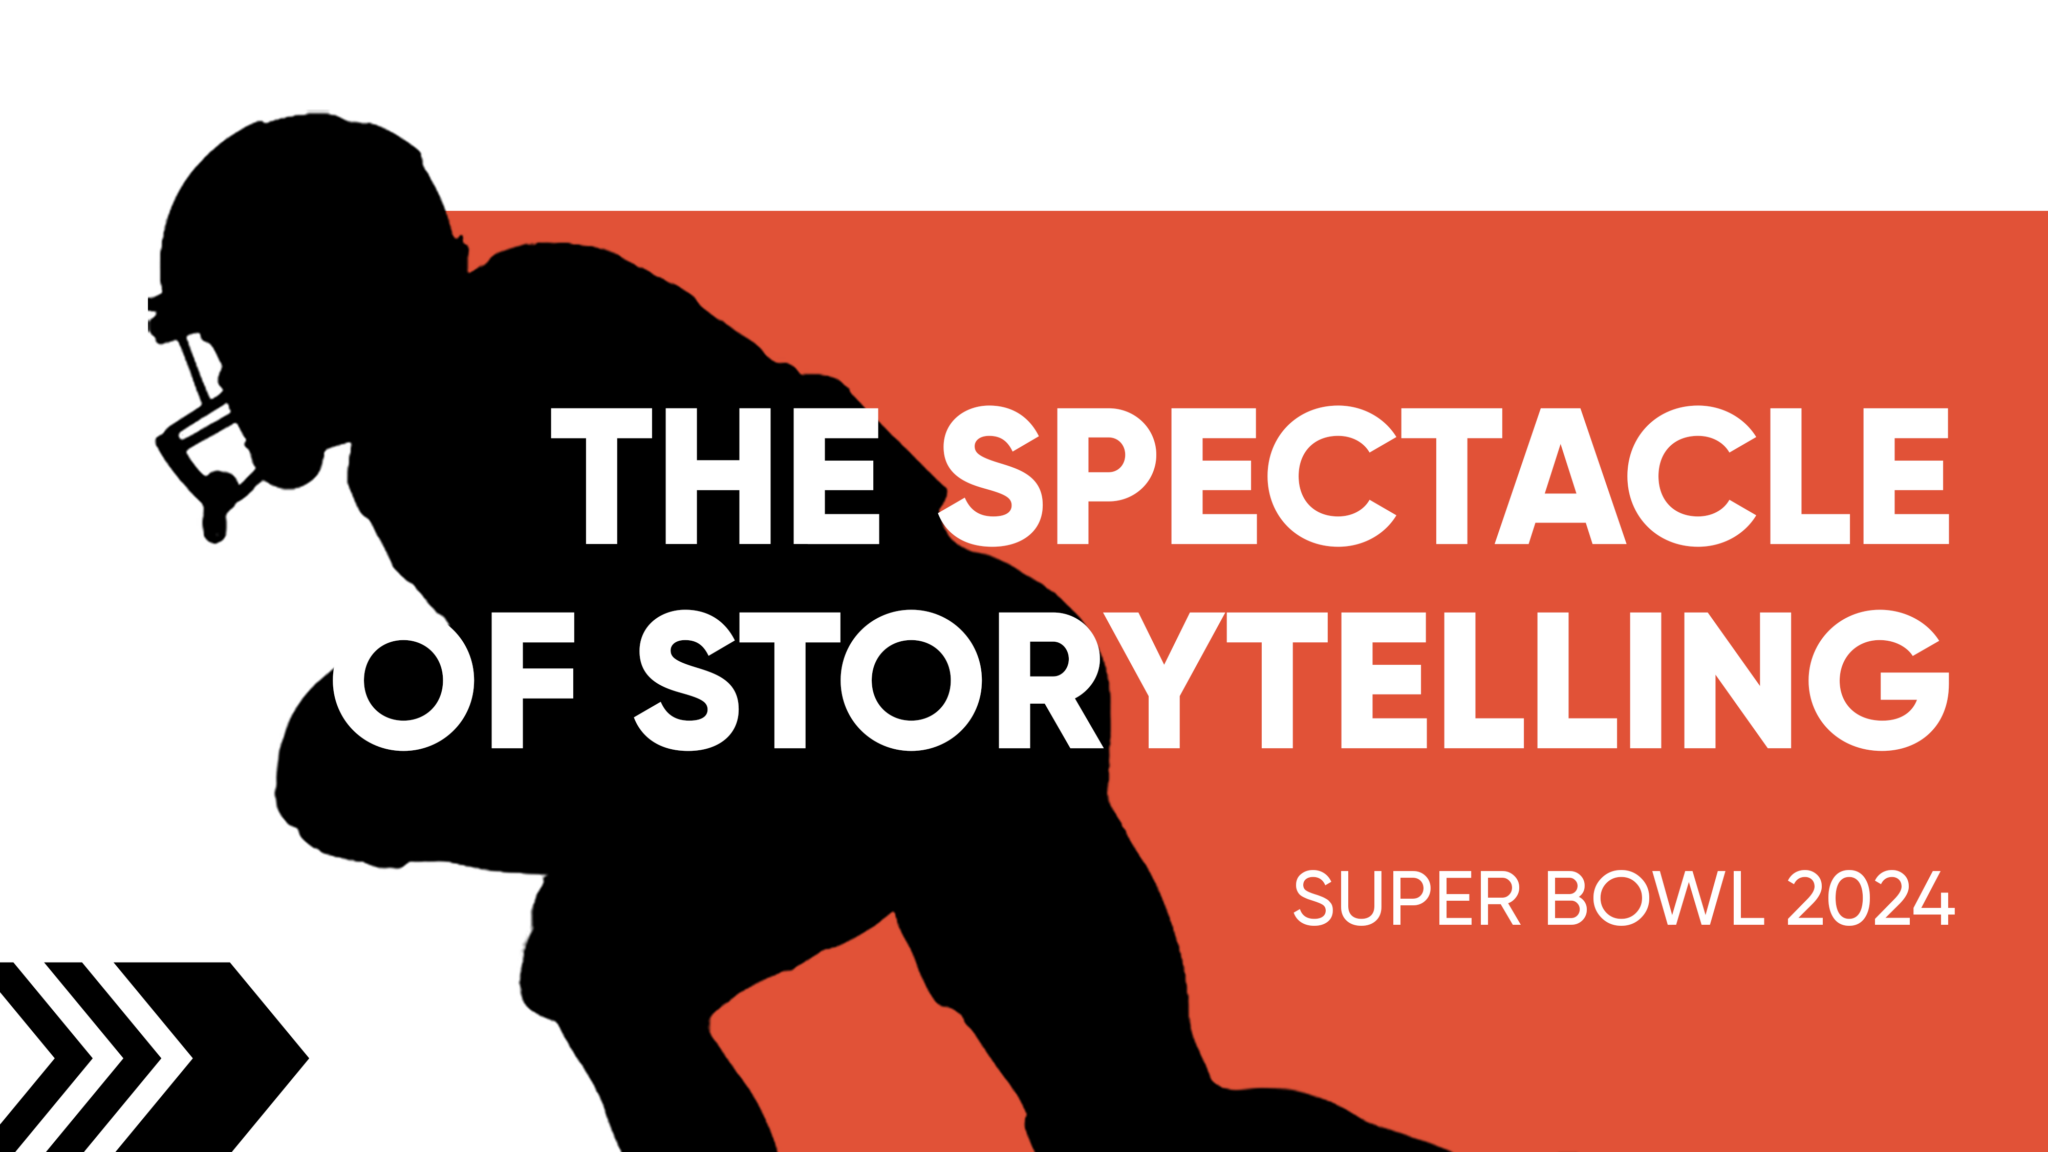 The Spectacle of Storytelling: Super Bowl 2024